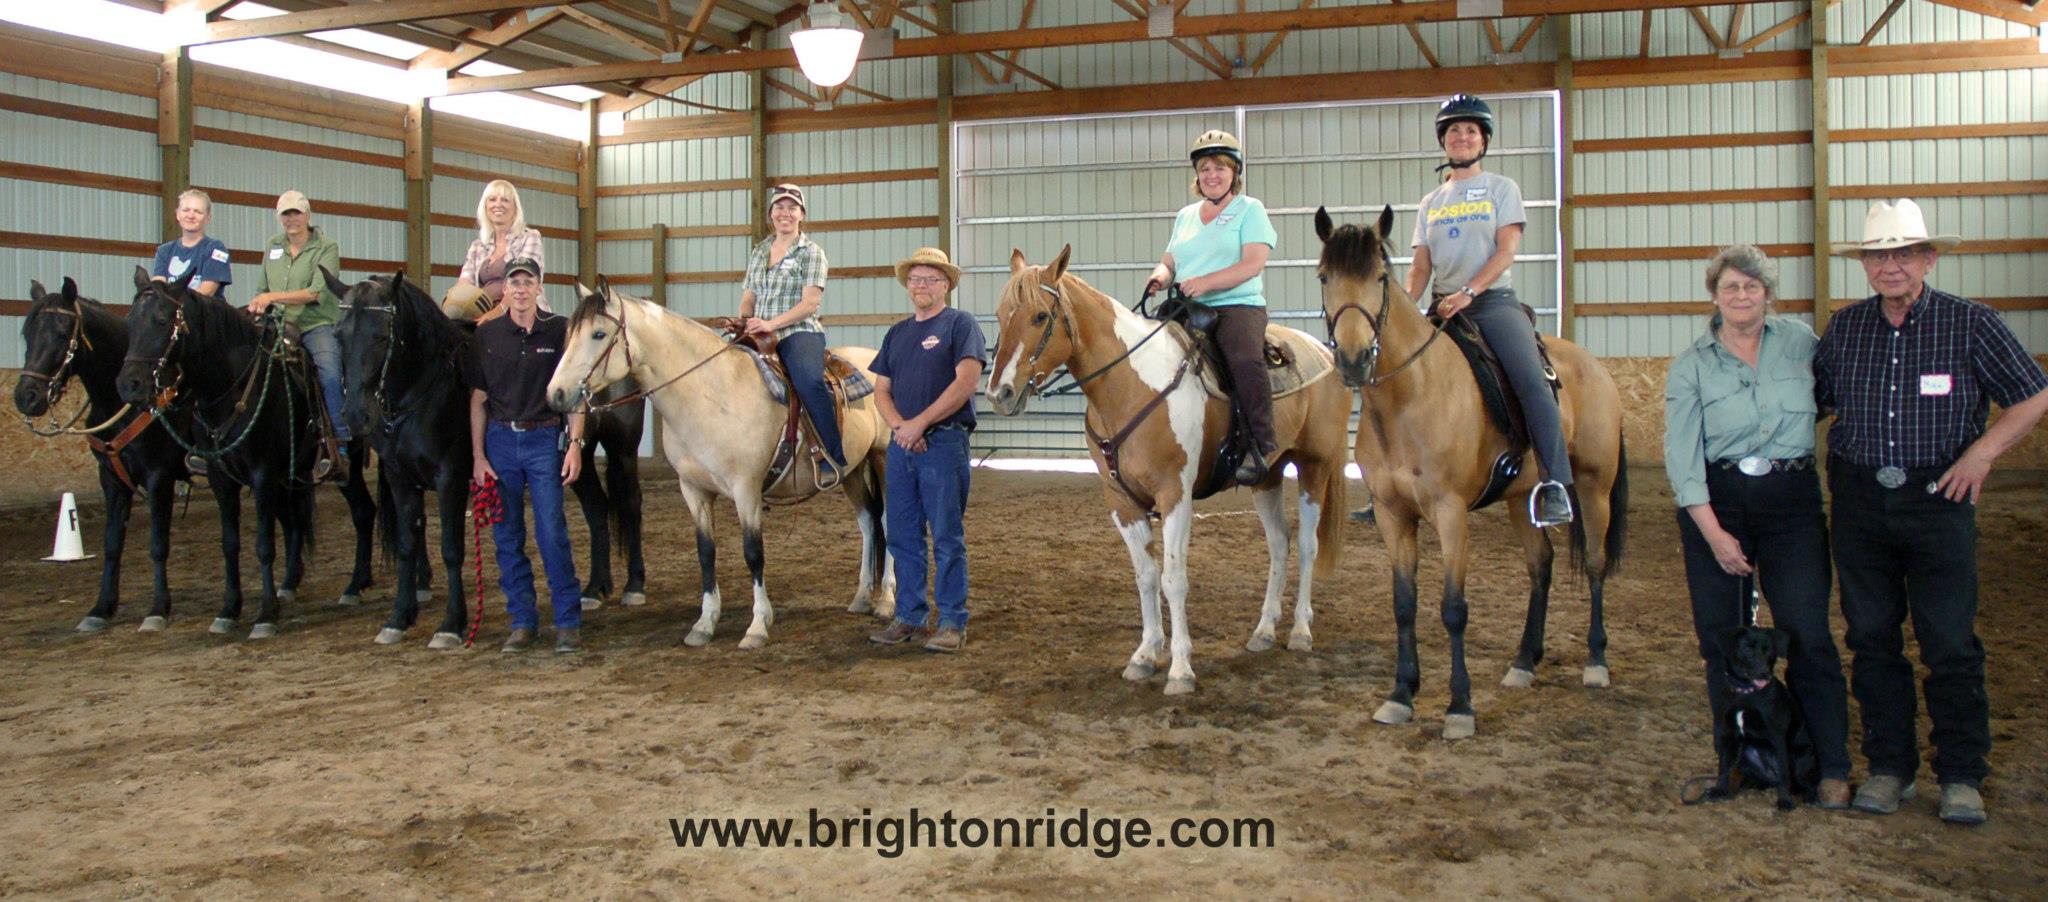 Wonderful group of people and horses at this clinic in Spokane at Lady Raven Stables..